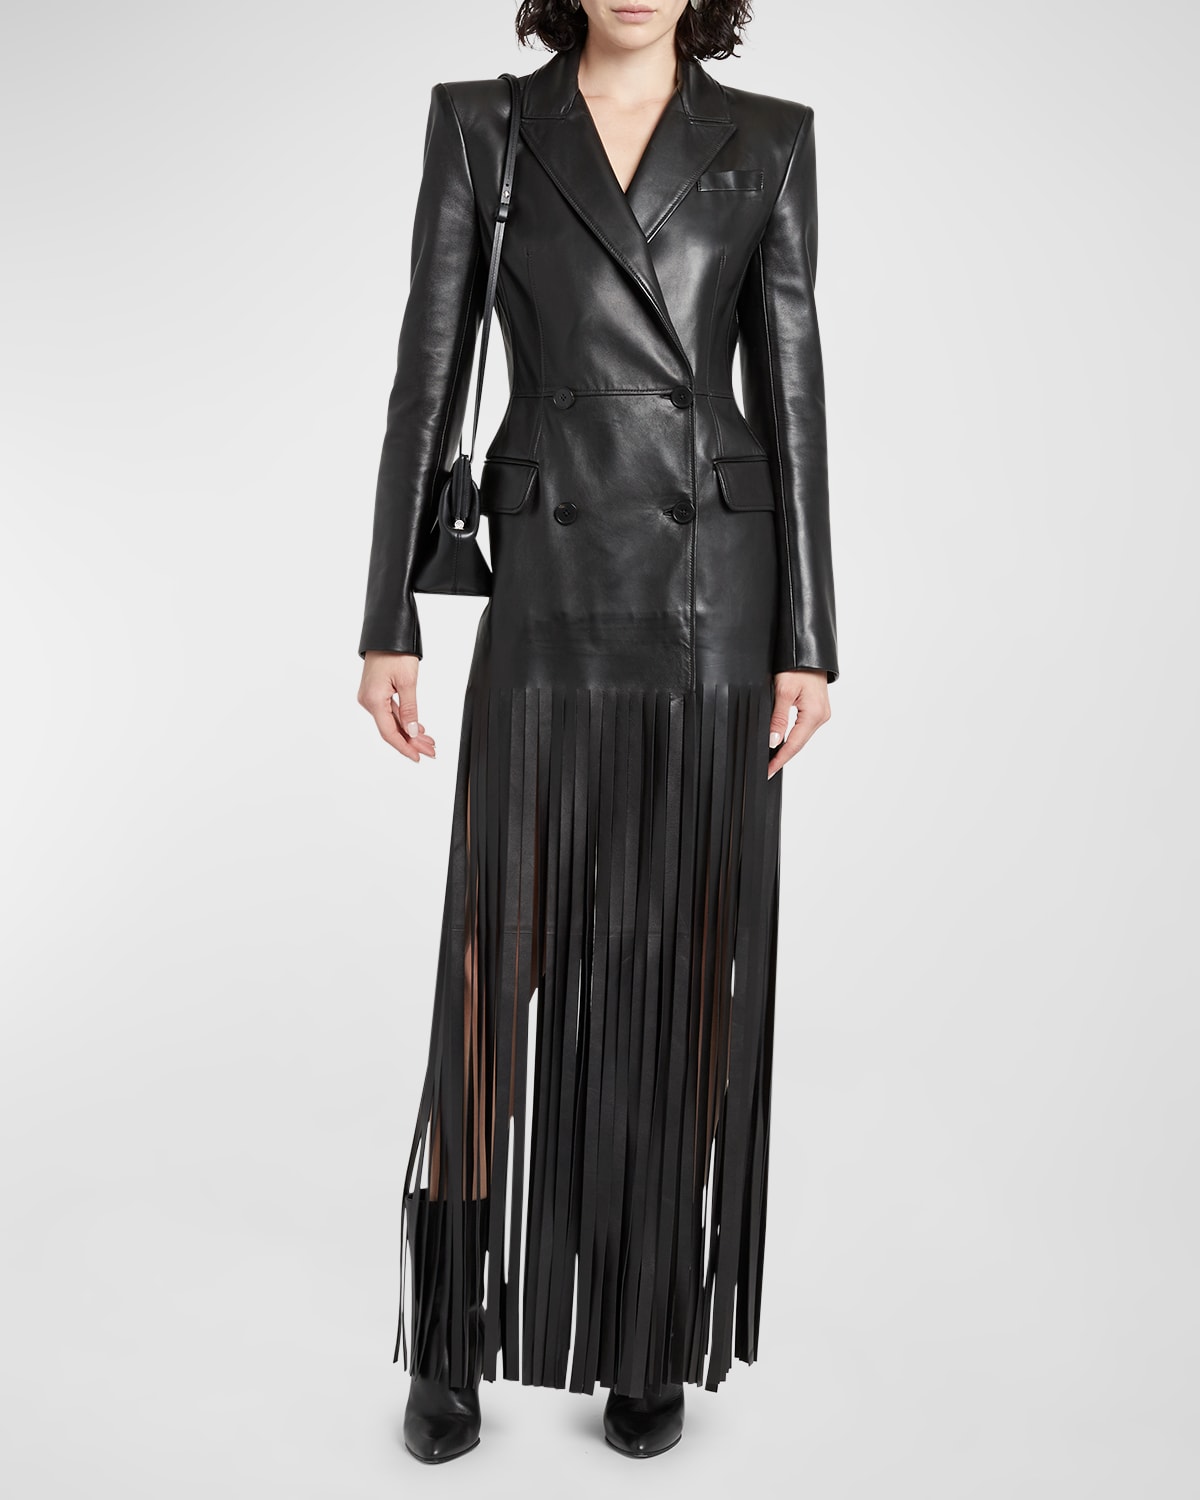 ALEXANDER MCQUEEN LEATHER FRINGED TRENCH COAT